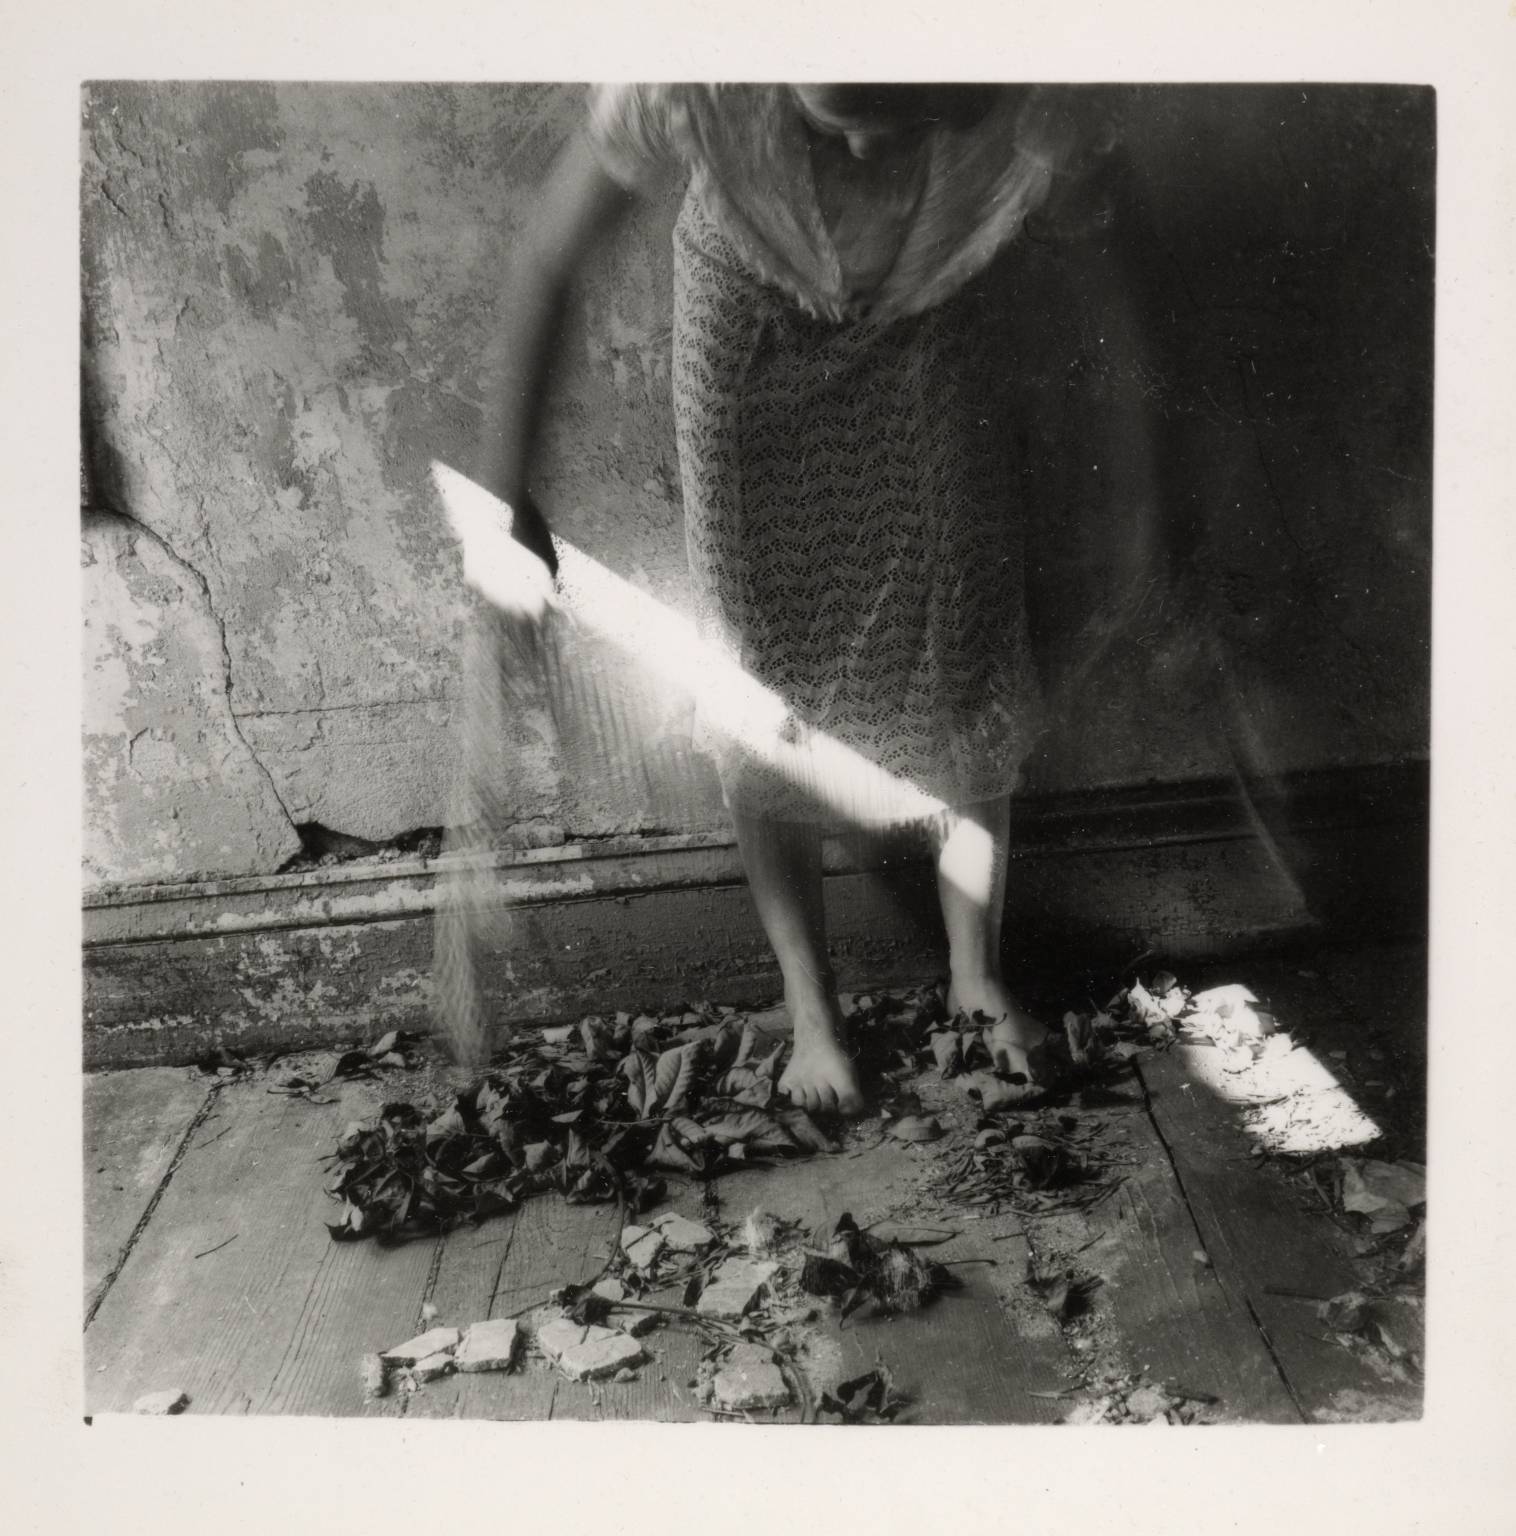 Untitled 1975-80 Francesca Woodman 1958-1981 ARTIST ROOMS Acquired jointly with the National Galleries of Scotland through The d'Offay Donation with assistance from the National Heritage Memorial Fund and the Art Fund 2008 http://www.tate.org.uk/art/work/AR00358